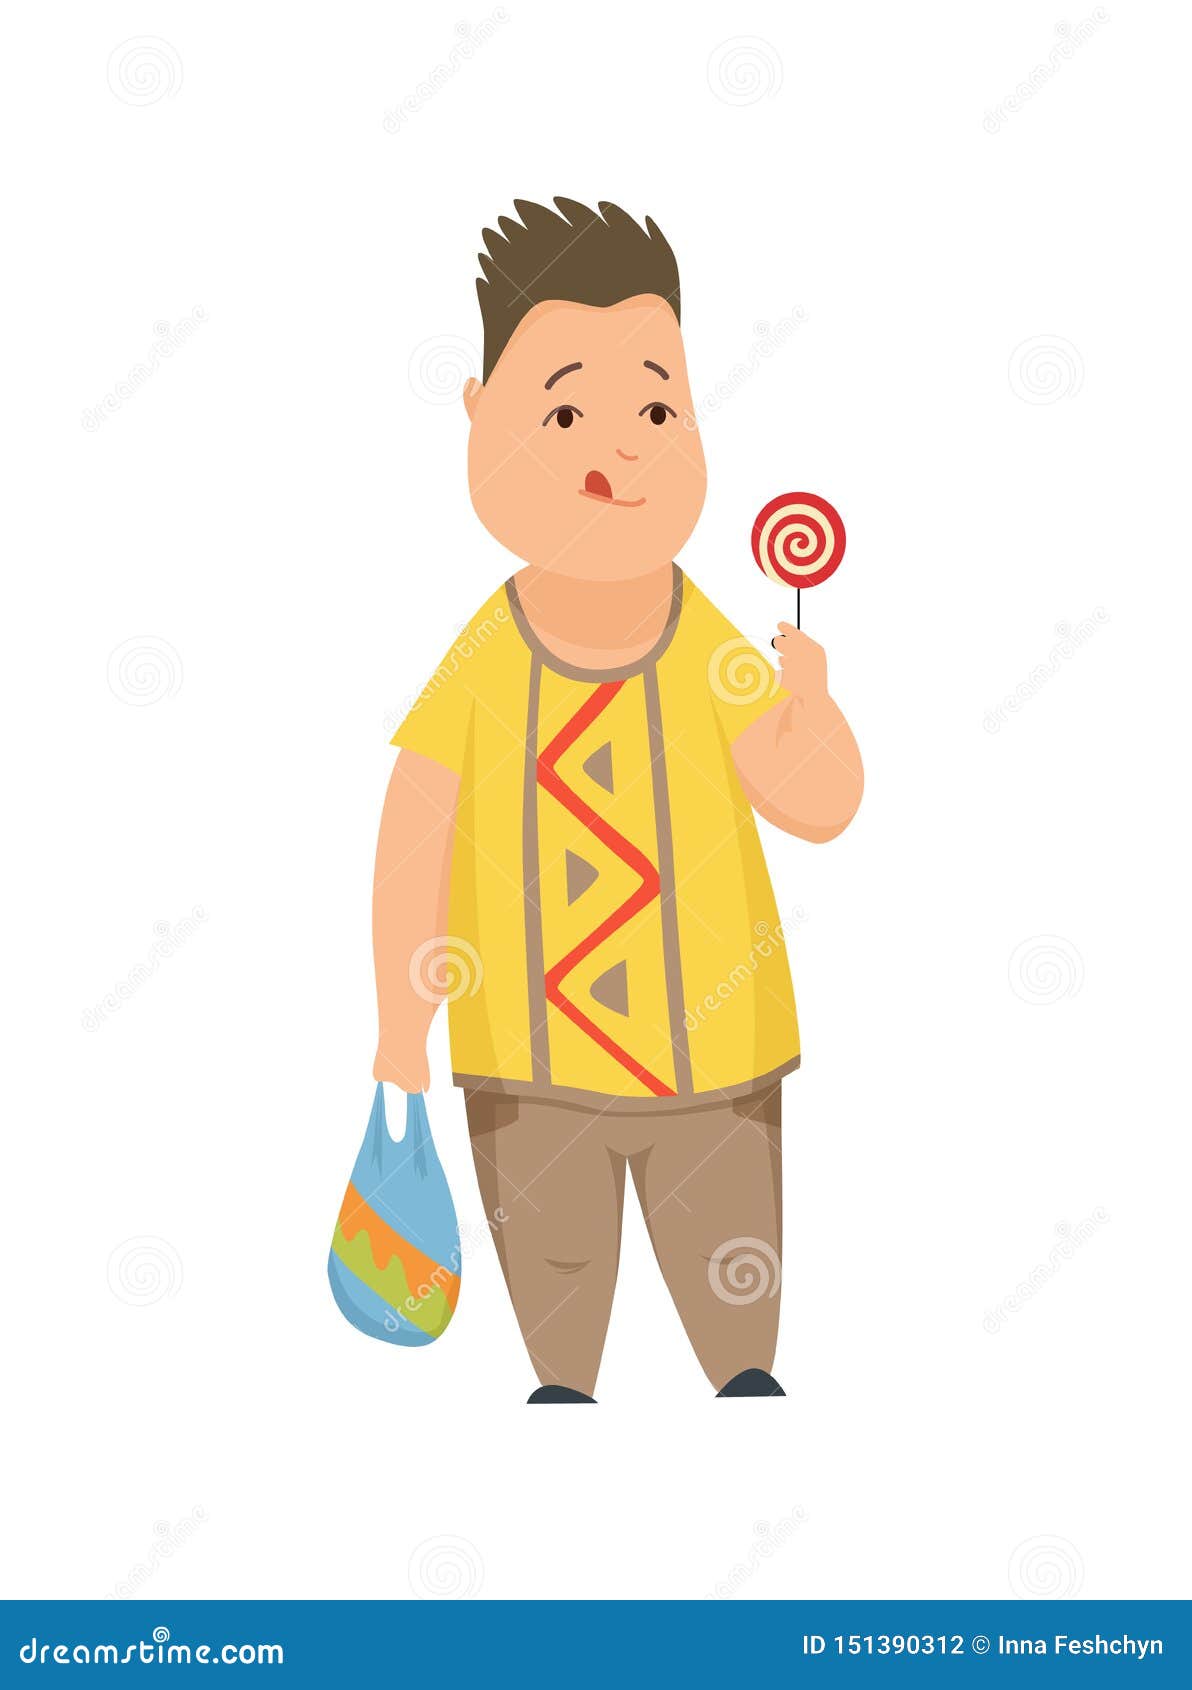 Overweight Boy, Cute Chubby Child Cartoon Character Vector Illustration on  a White Background. Stock Vector - Illustration of chubby, cute: 151390312